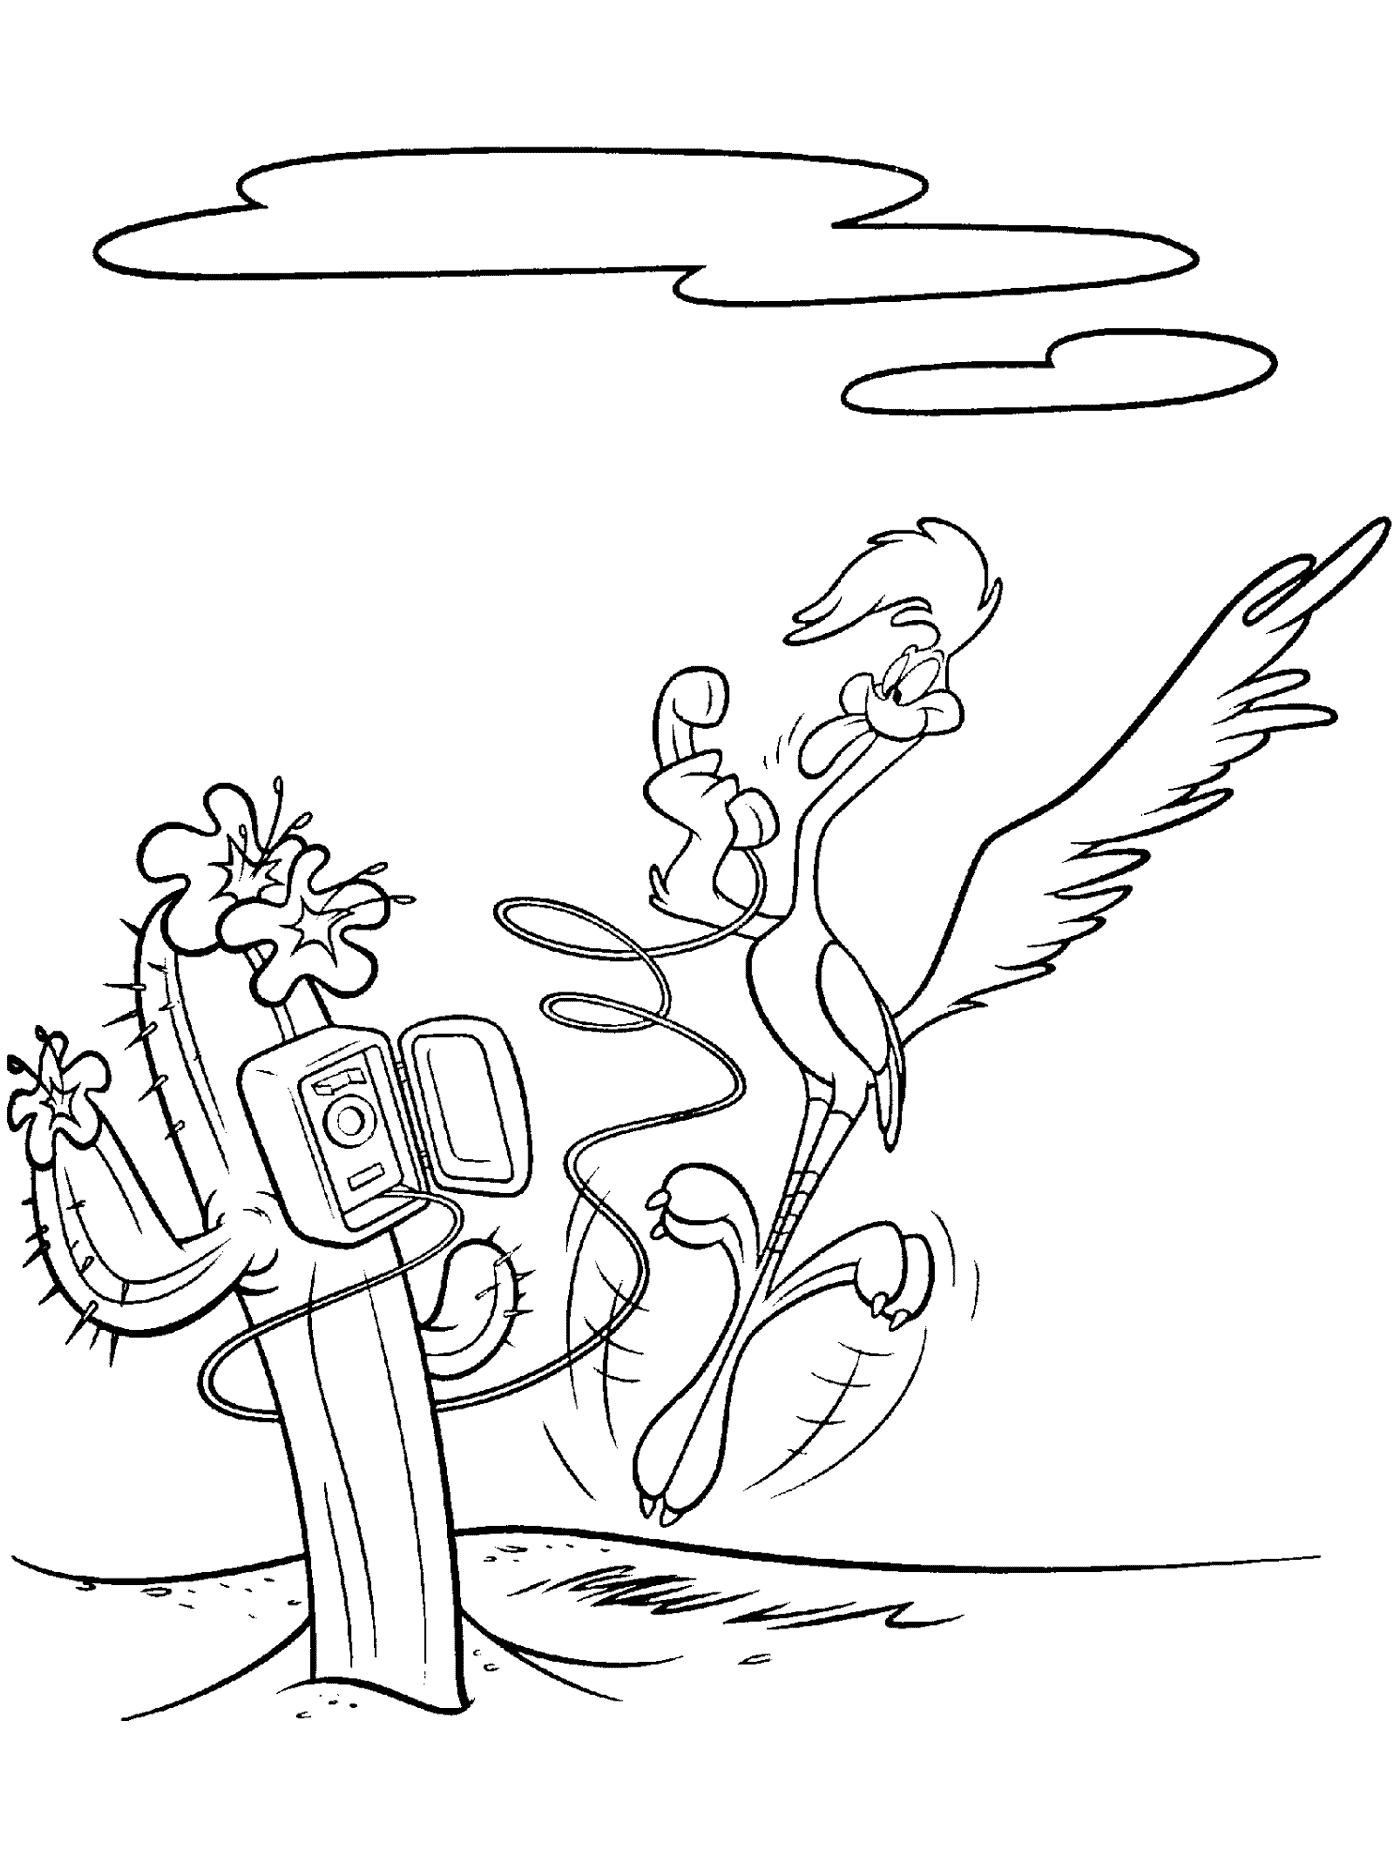 Road Runner Colouring Pictures - High Quality Coloring Pages